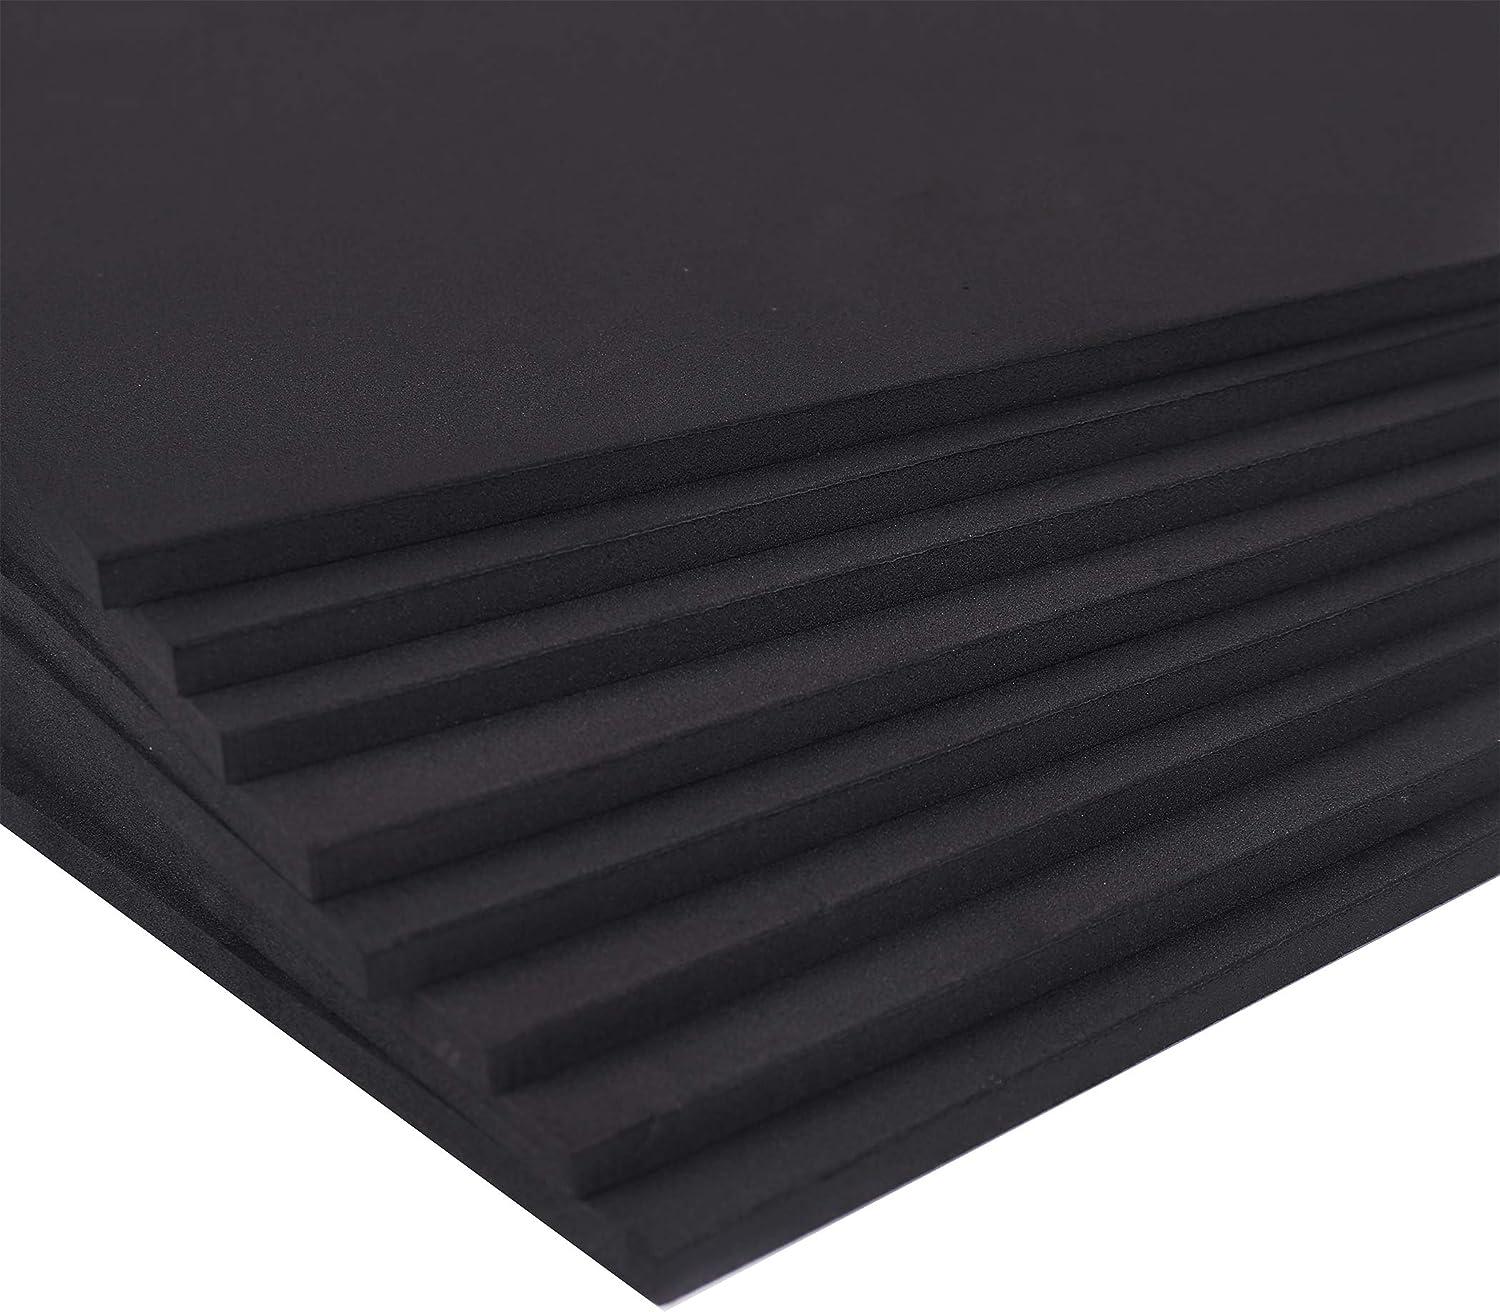 Better Crafts Black EVA Foam Sheet, 9 inch x 12 inch, 6 mm- Thick! Great  for Crafts! (1 pack)